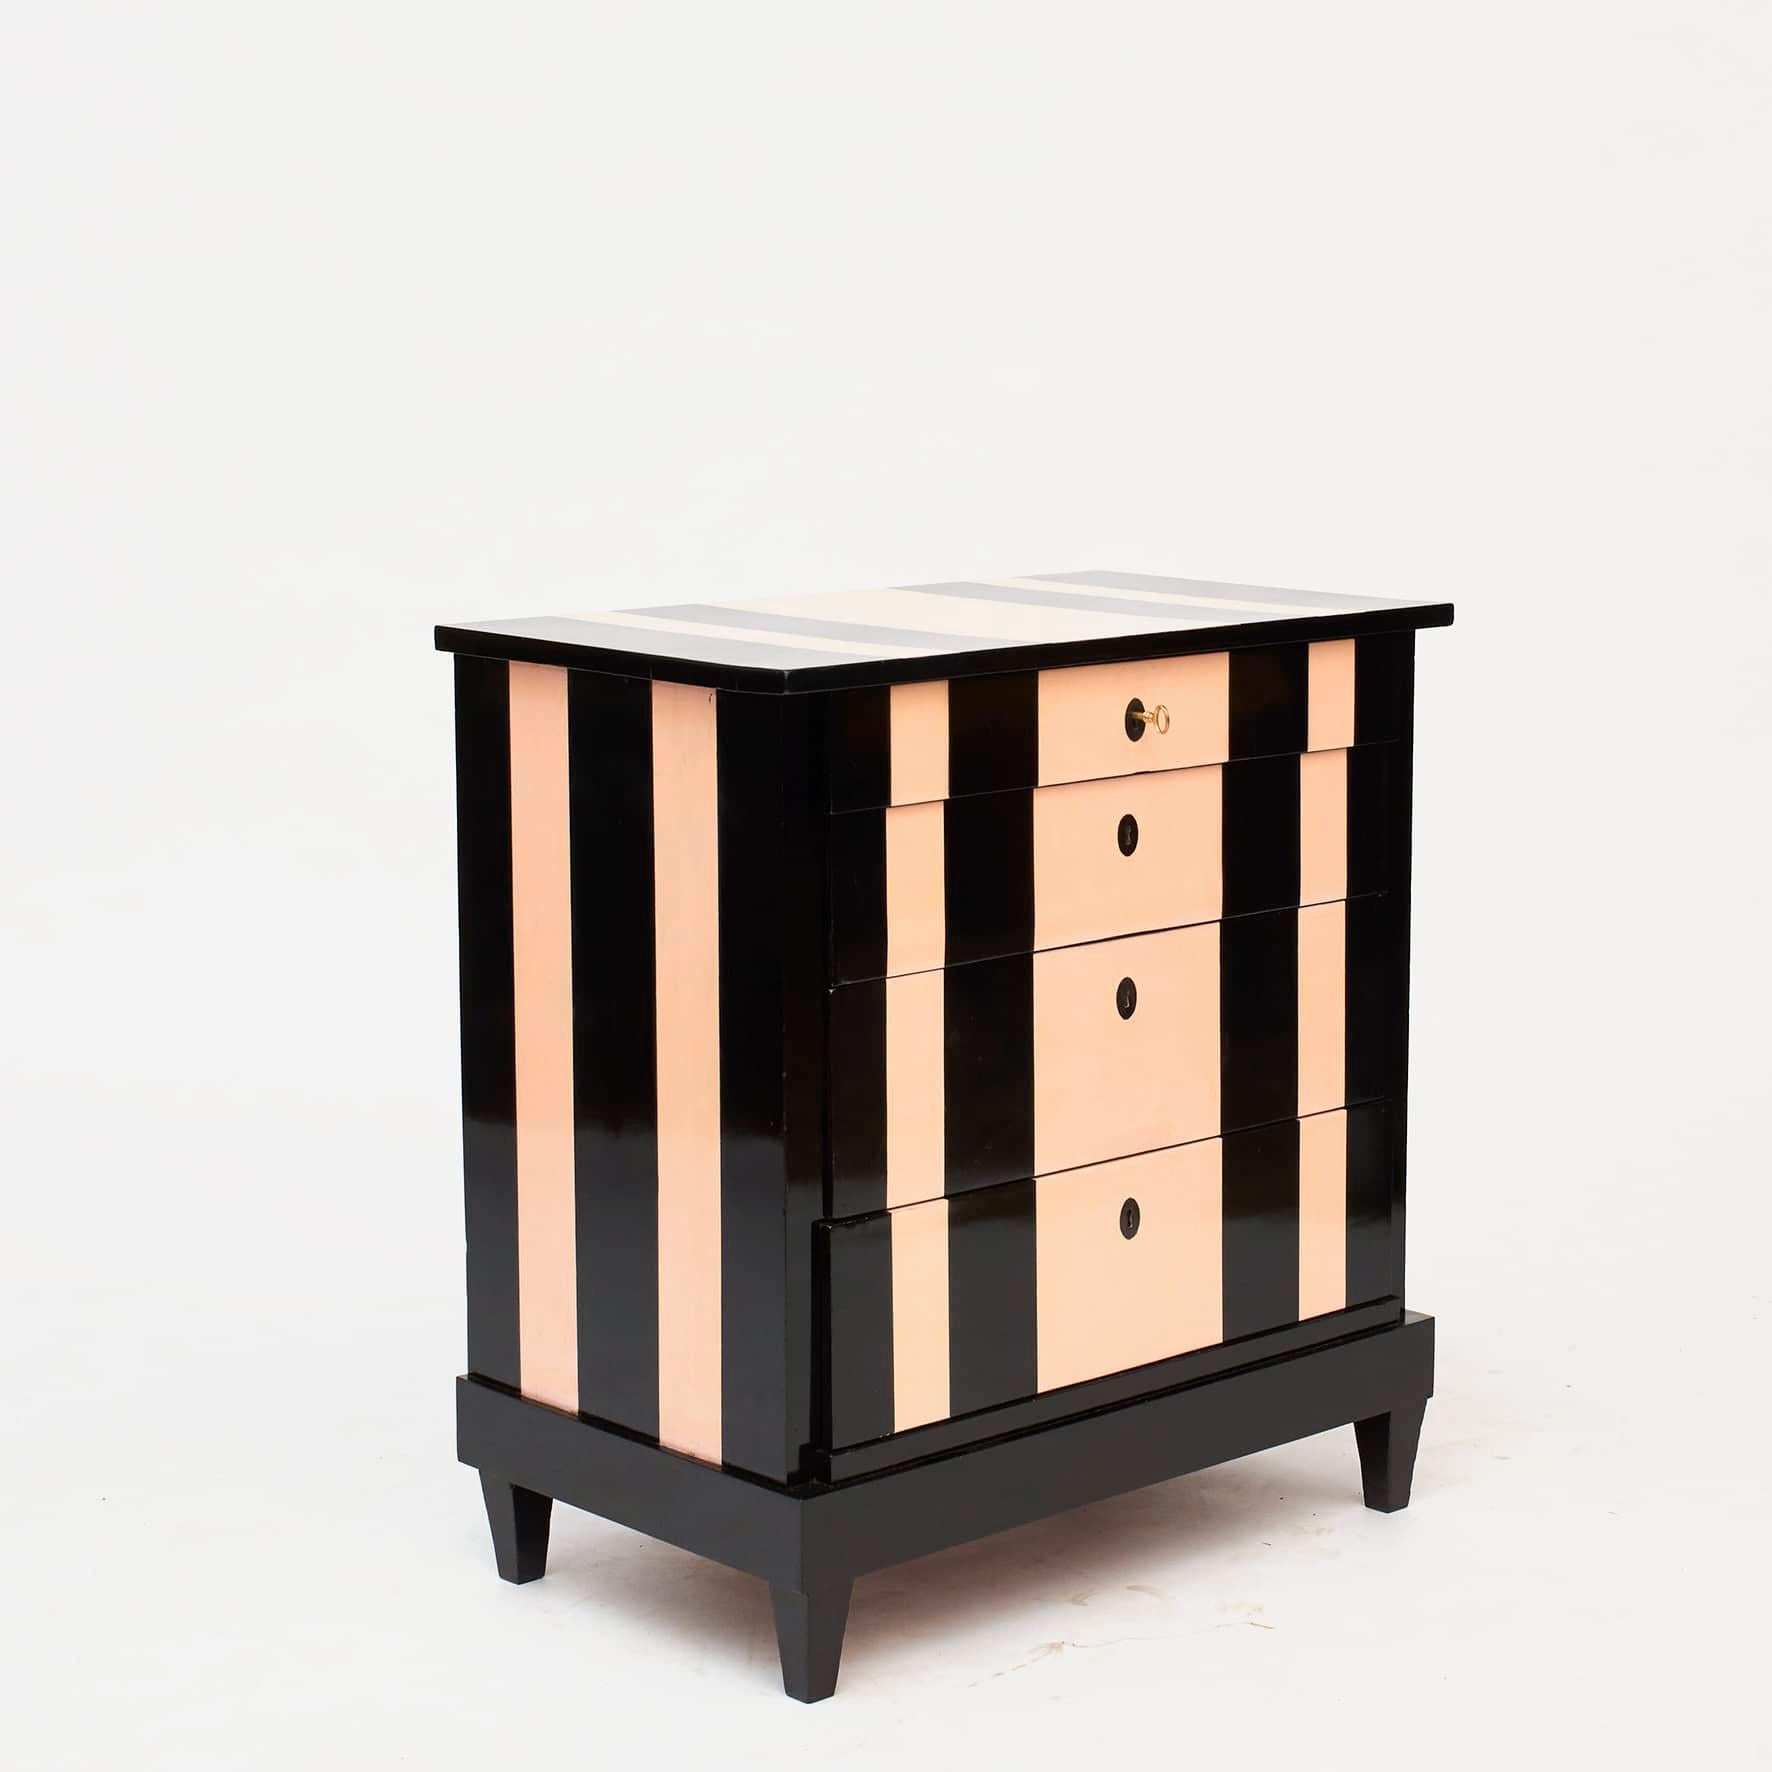 Danish 'Chanel' Inspired Chest of Drawers, Late Empire, circa 1840